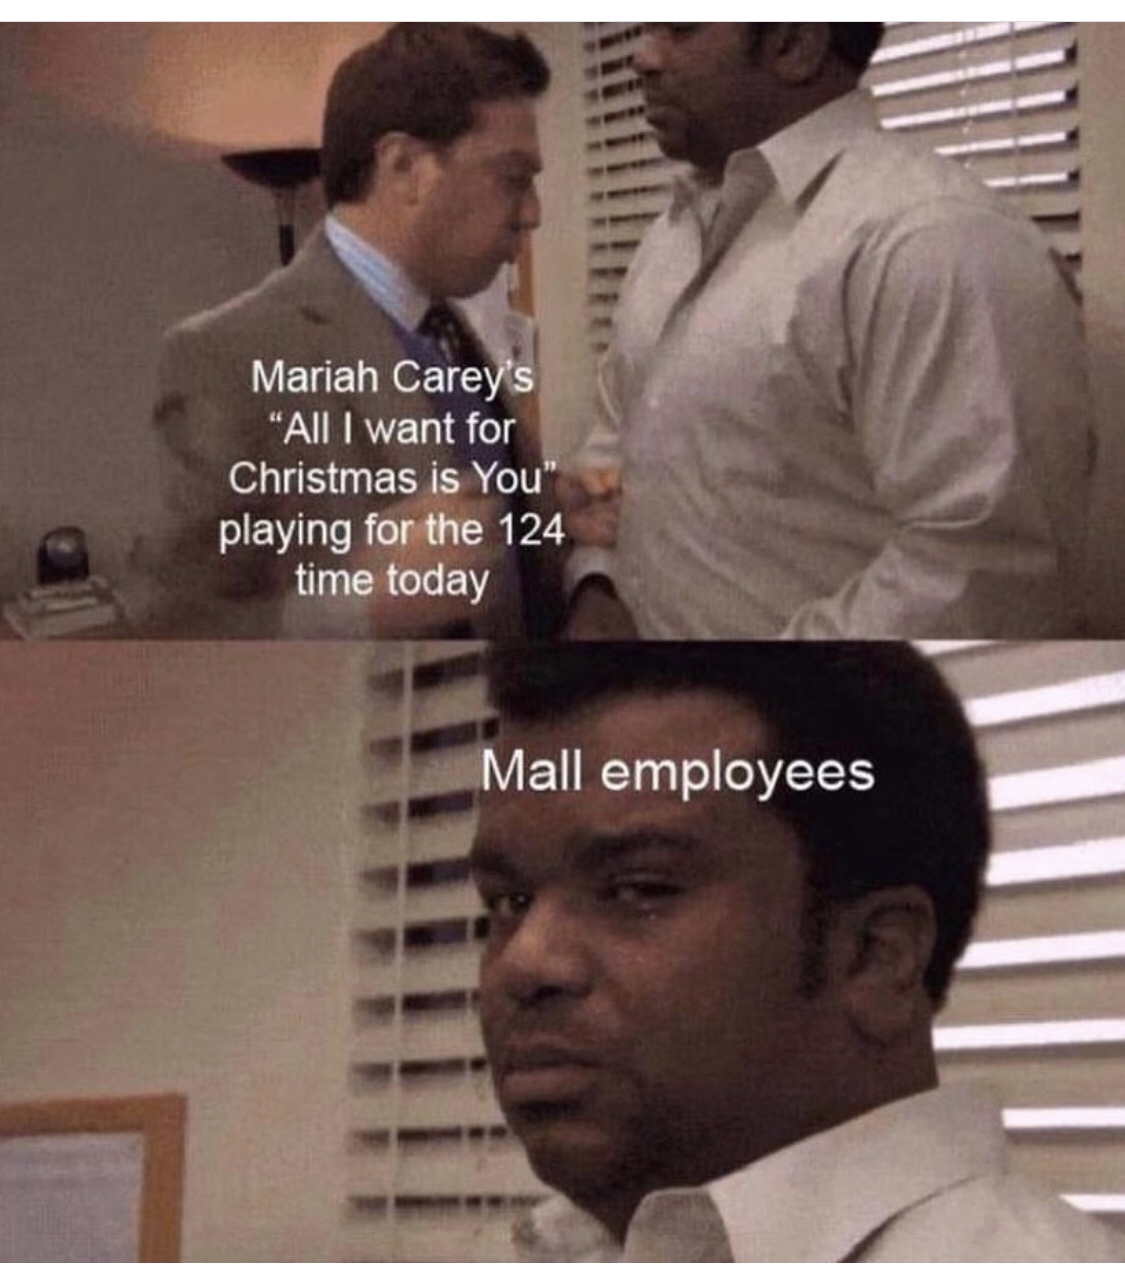 innocent black man meme - Mariah Carey's "All I want for Christmas is You" playing for the 124 time today Mall employees